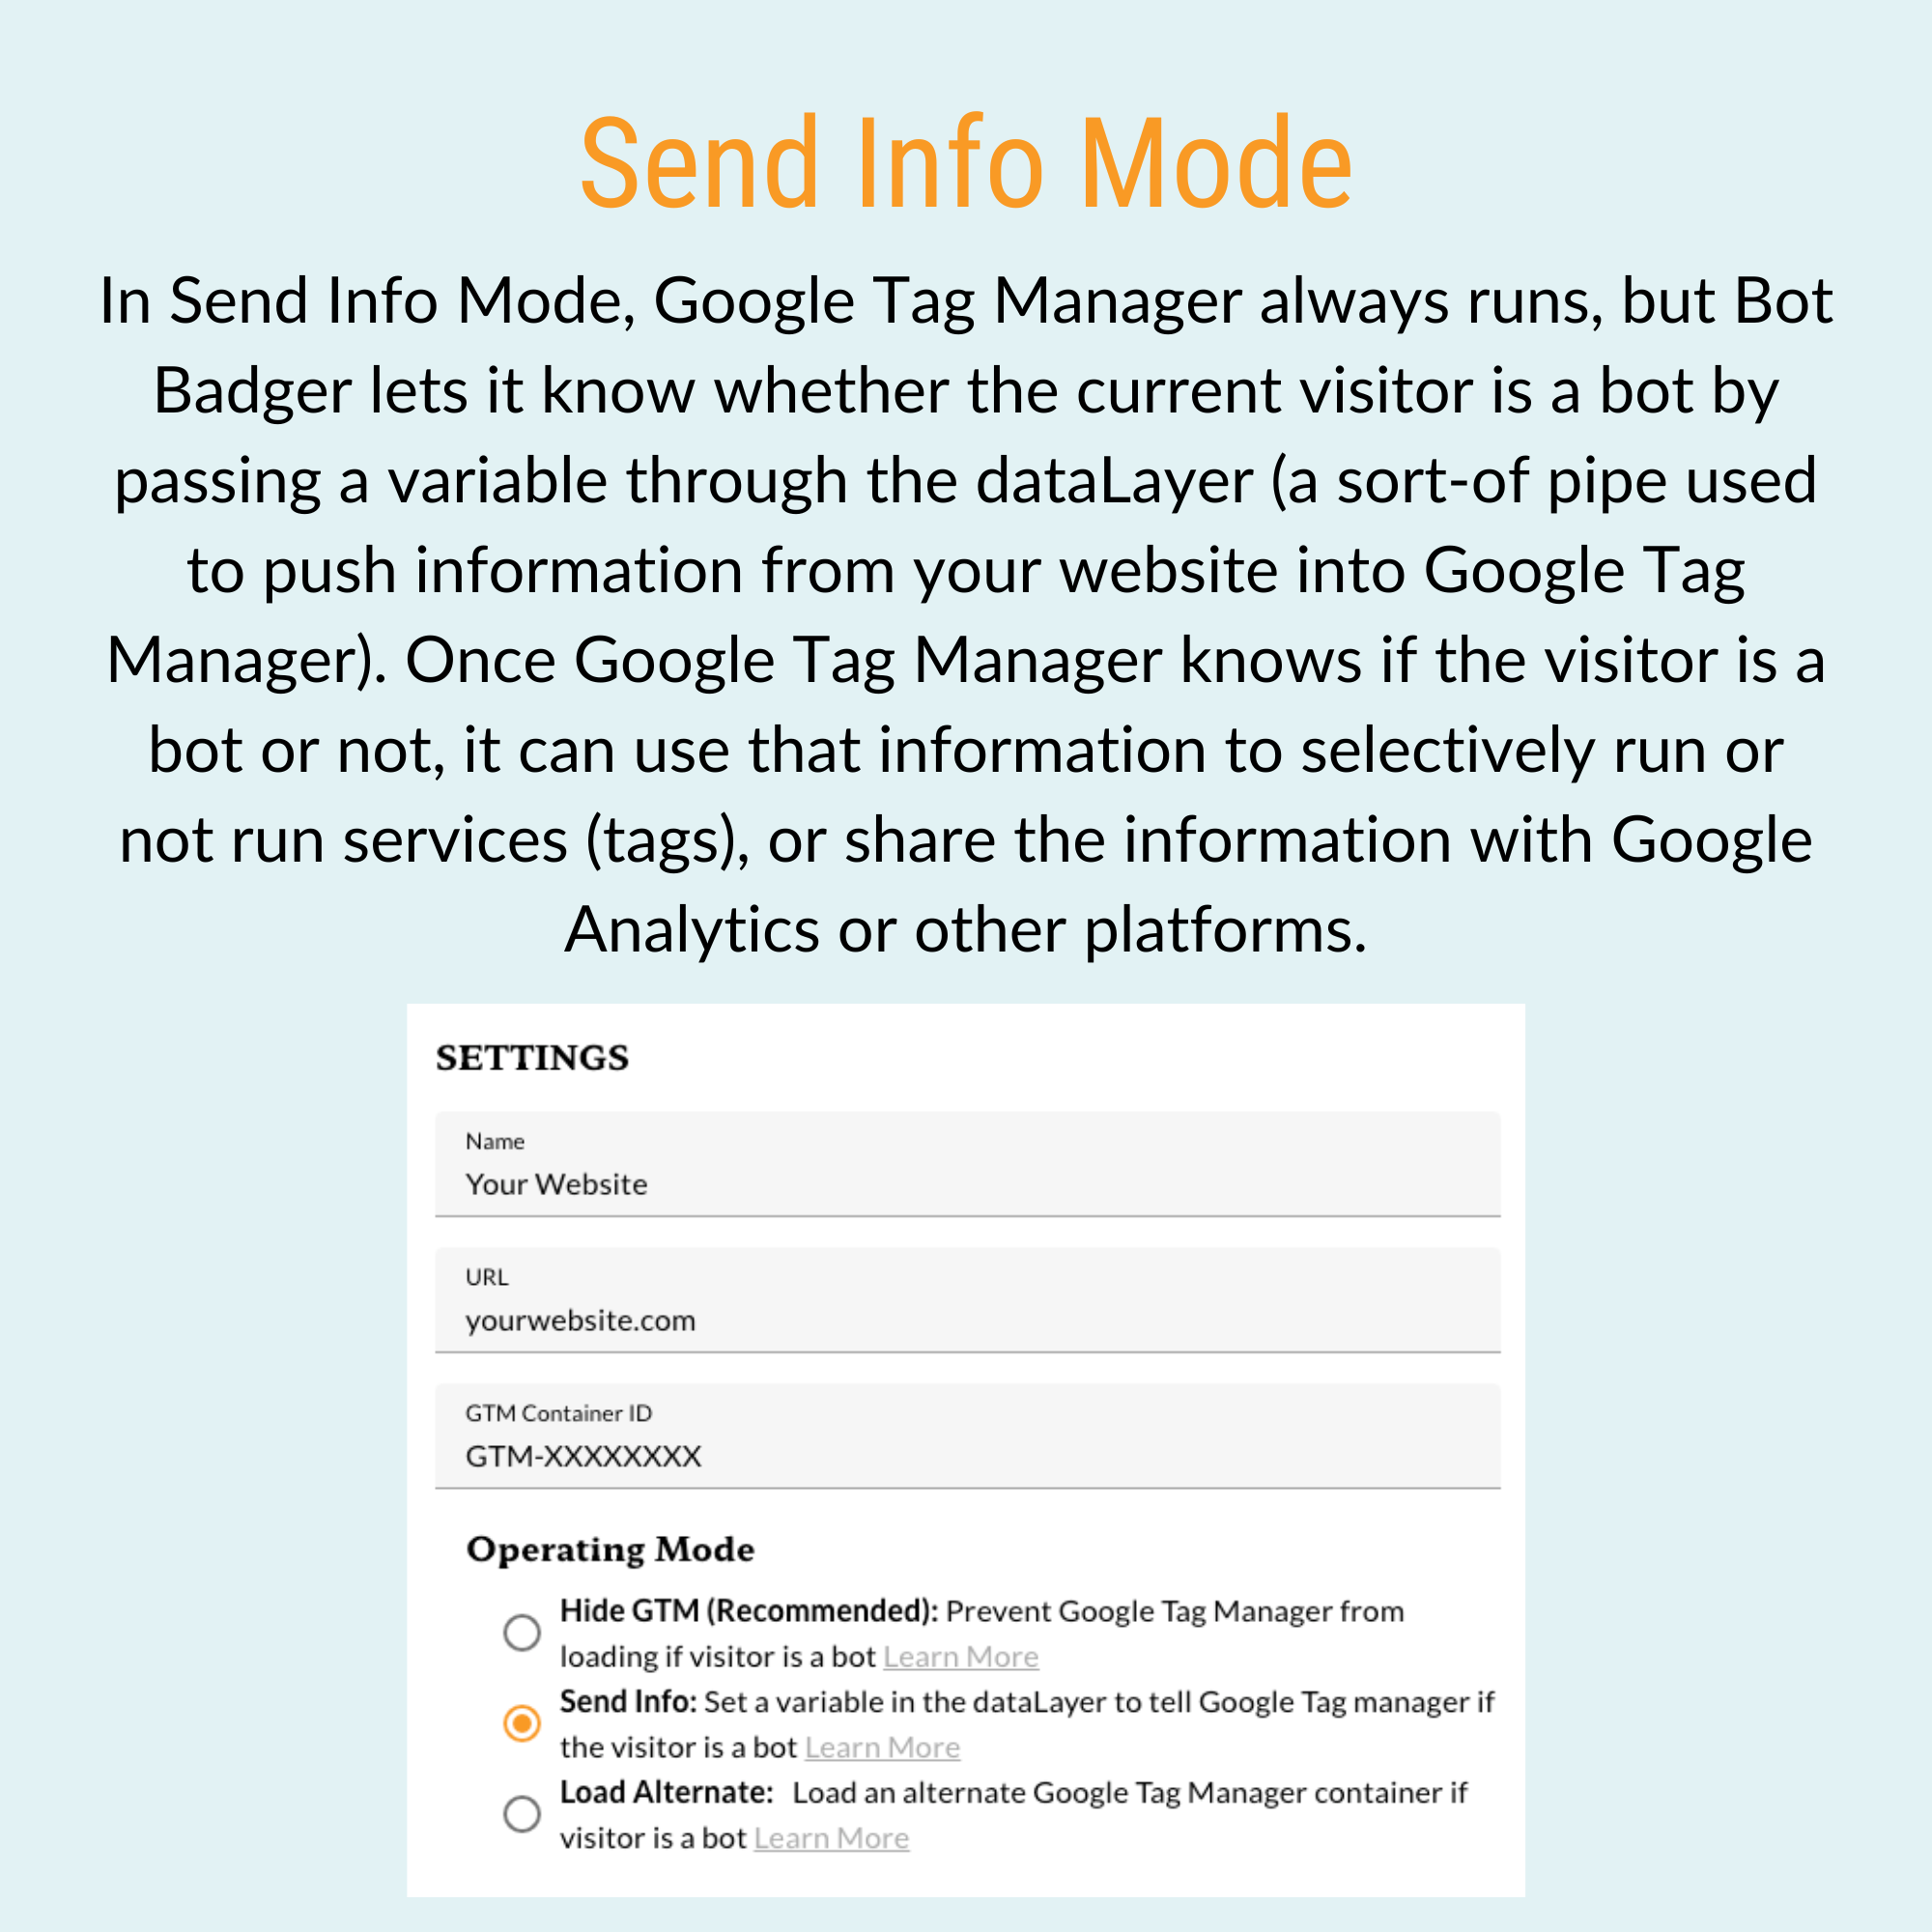 In Send Info Mode, Bot Badger enables Google Tag Manager to identify visitors as bots or humans by passing a variable, allowing for selective tag execution and data sharing based on visitor type.